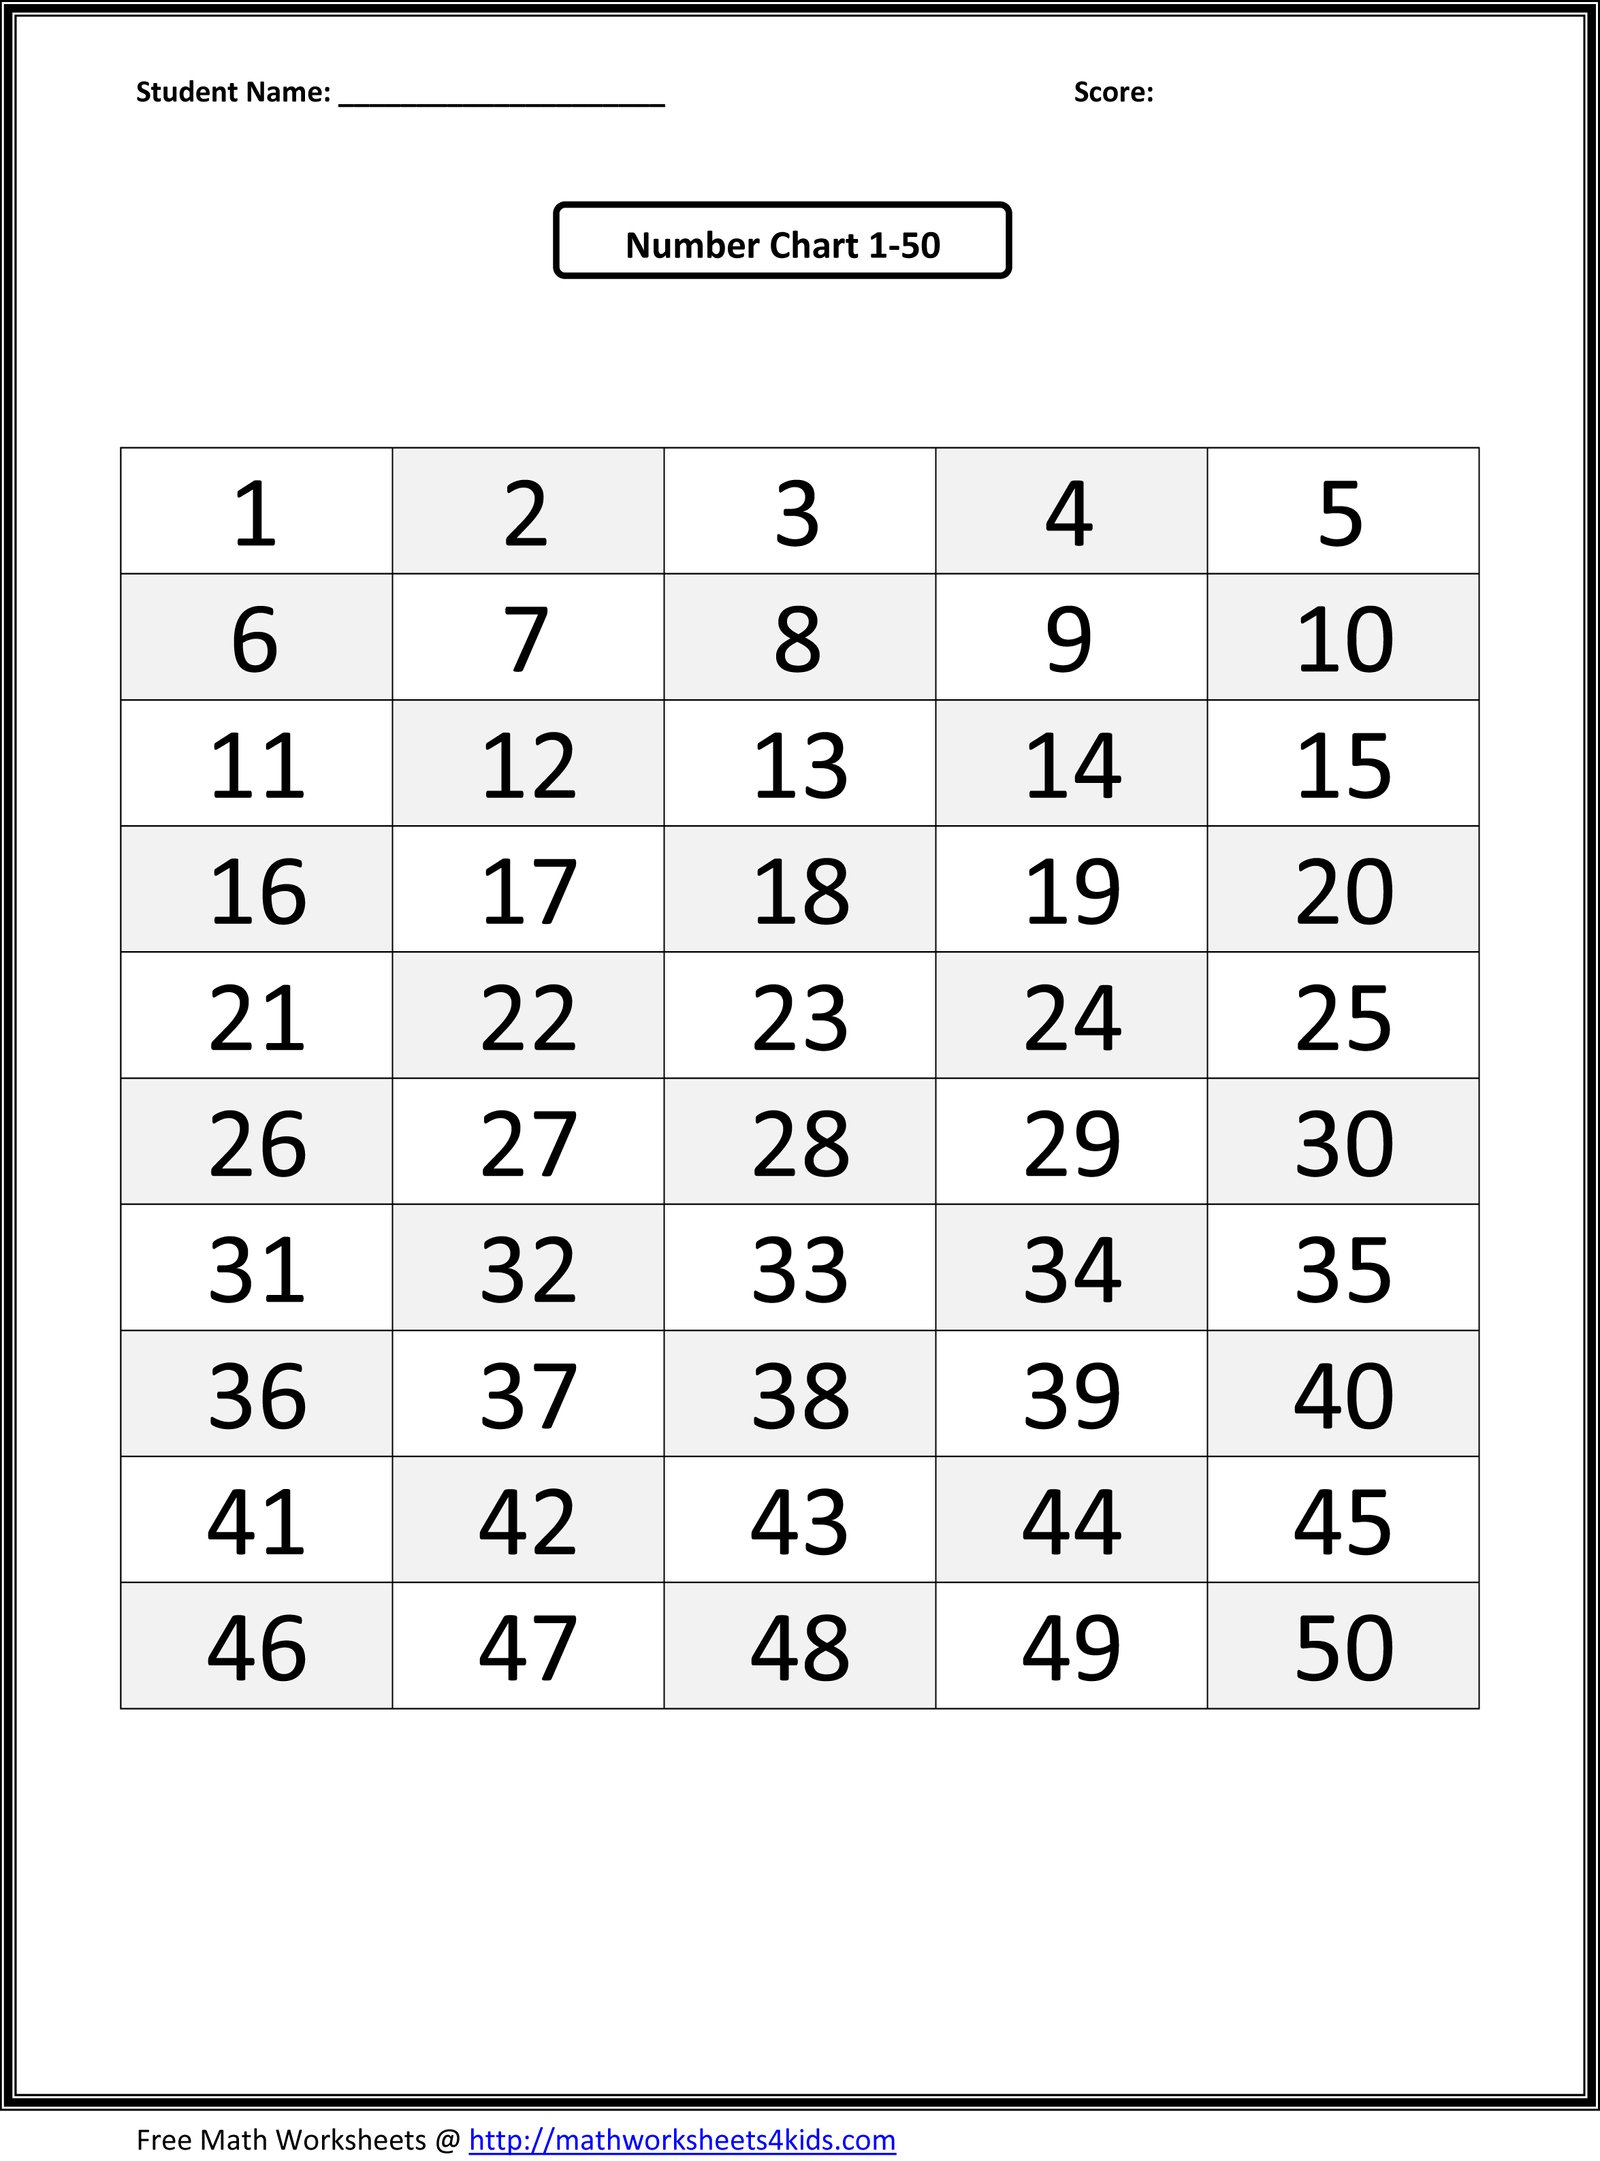 13 Best Images of Numbers 10- 20 Worksheets - Numbers 10 ...